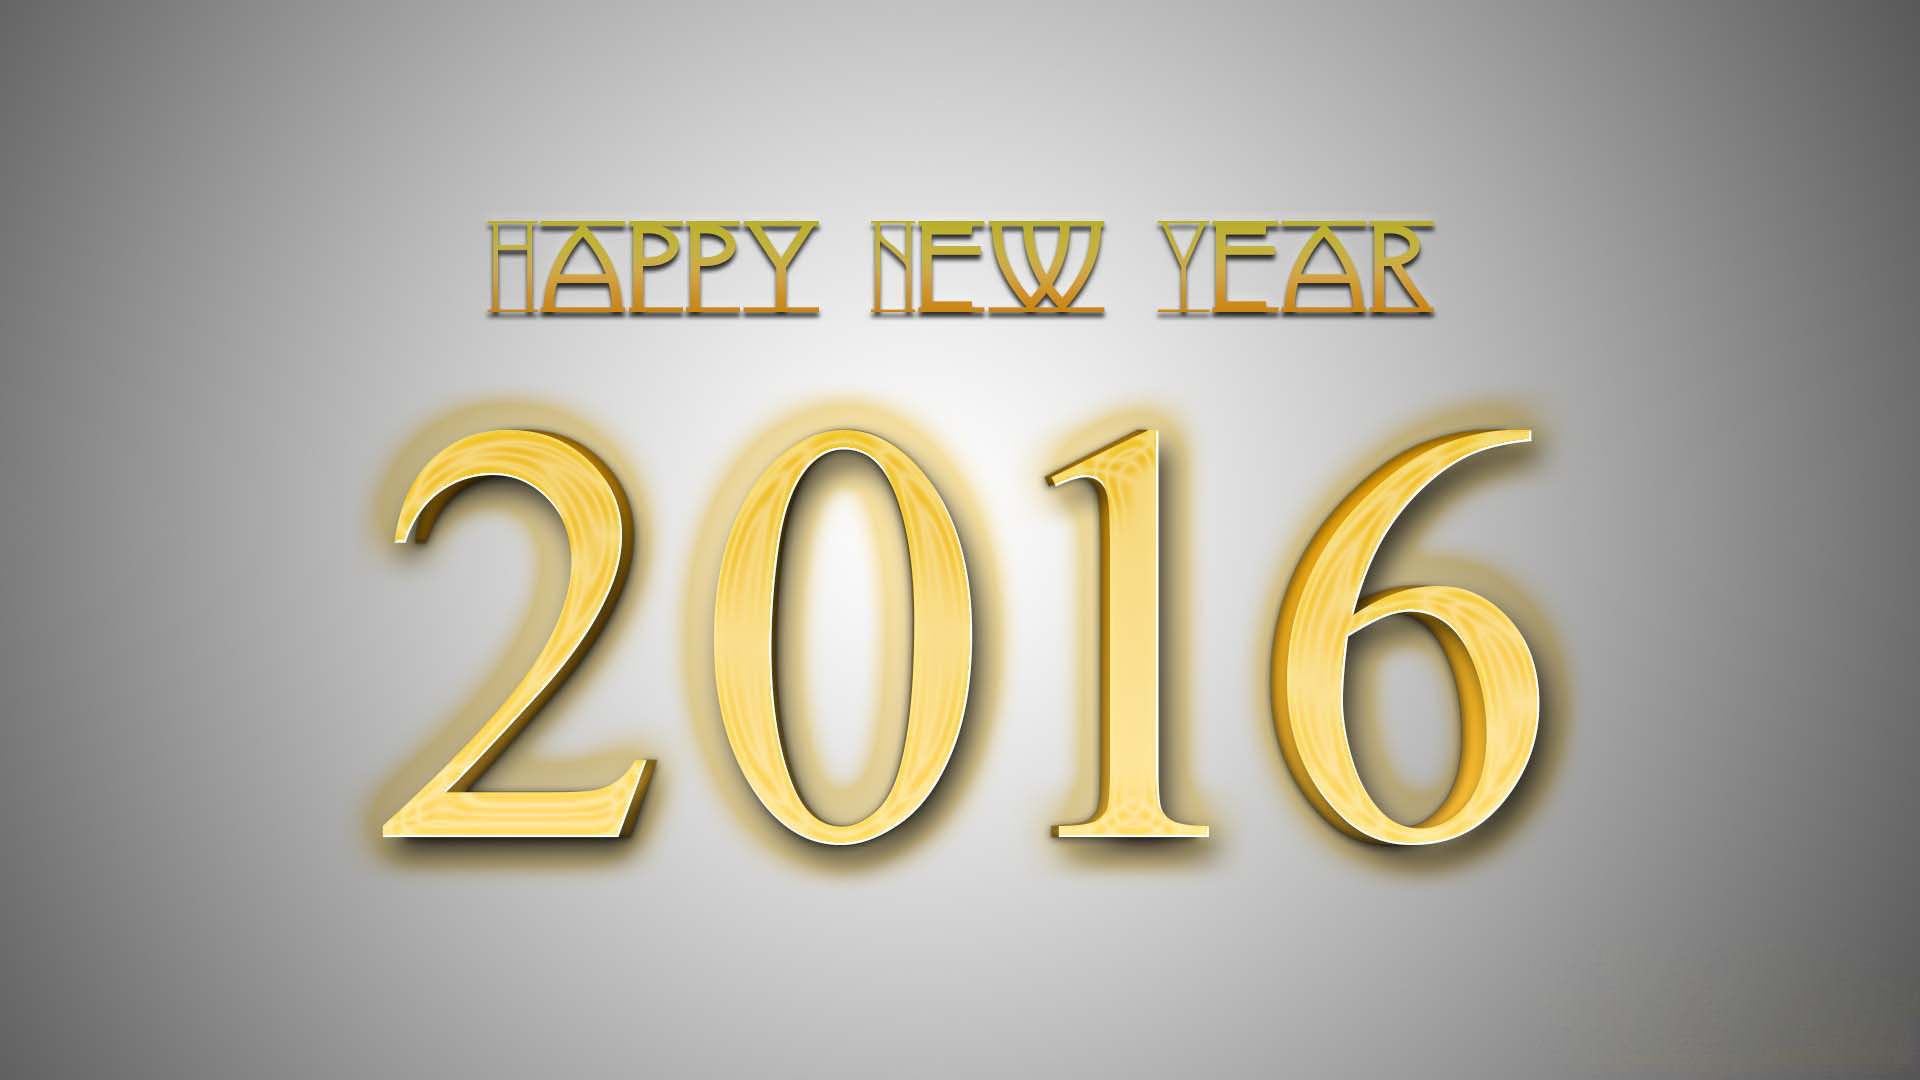 Download full hd 1080p New Year 2016 PC wallpaper ID:256782 for free